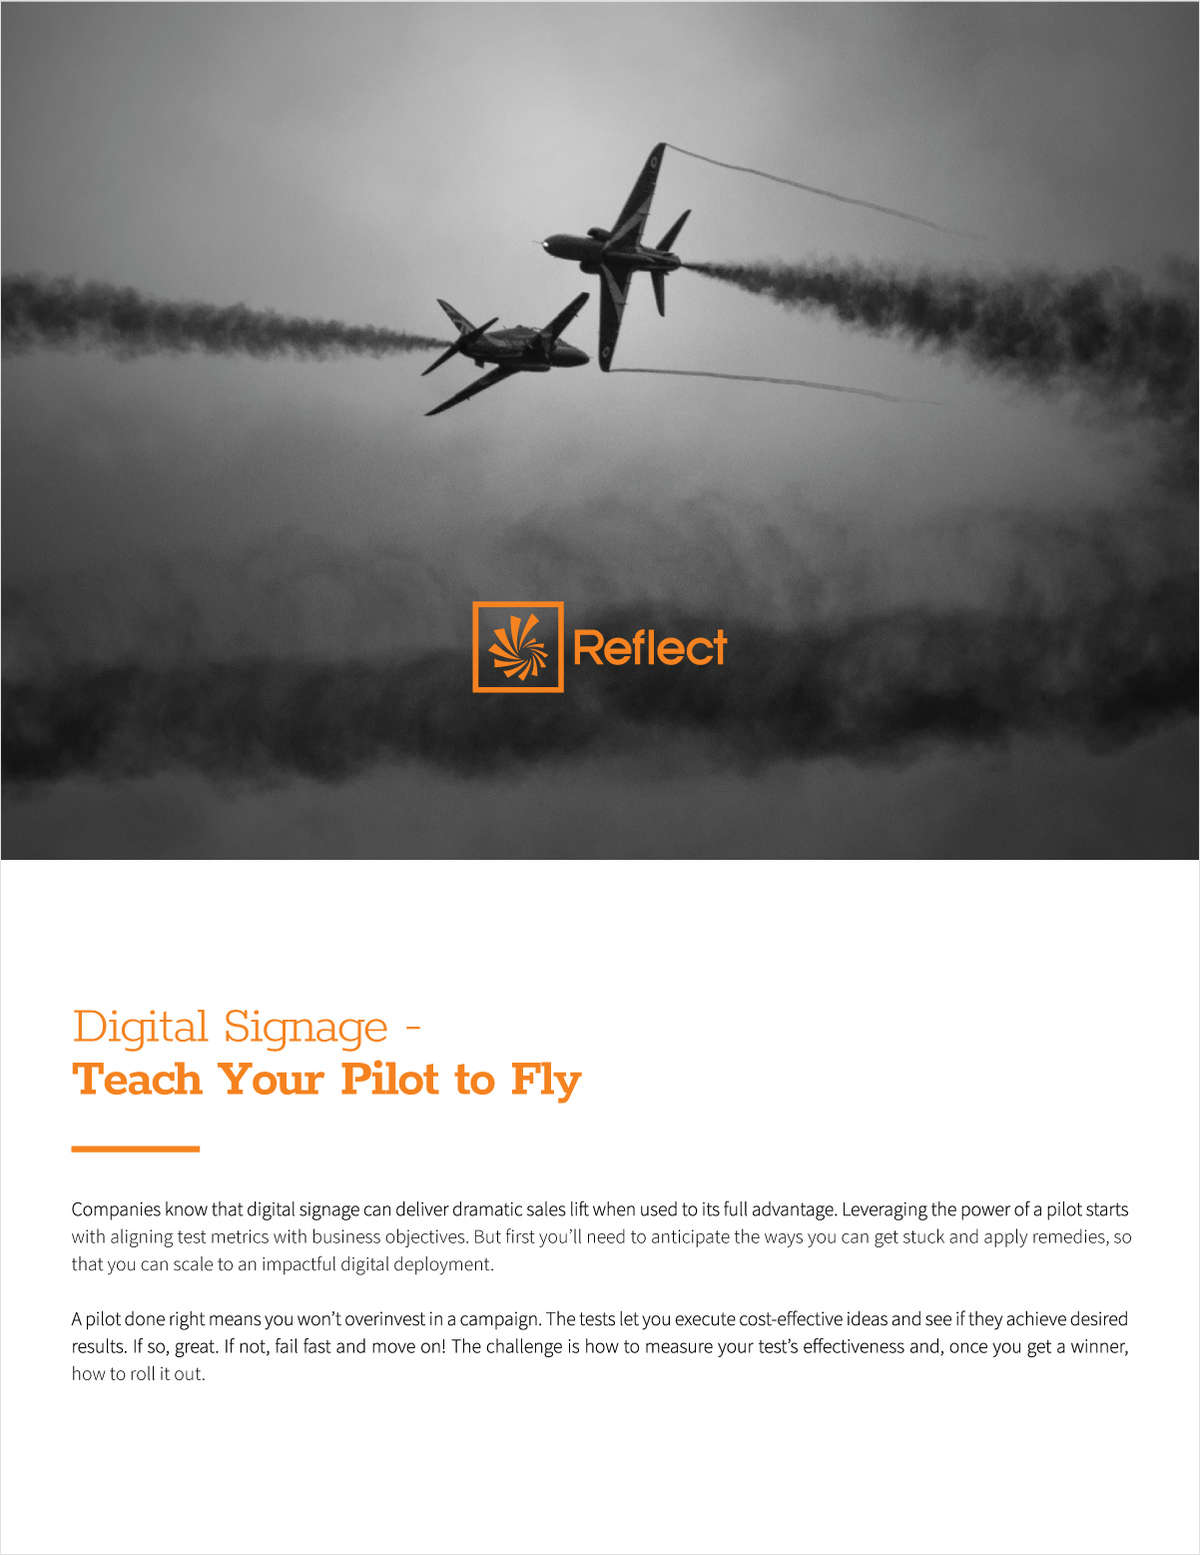 Digital Signage - Teach Your Pilot to Fly